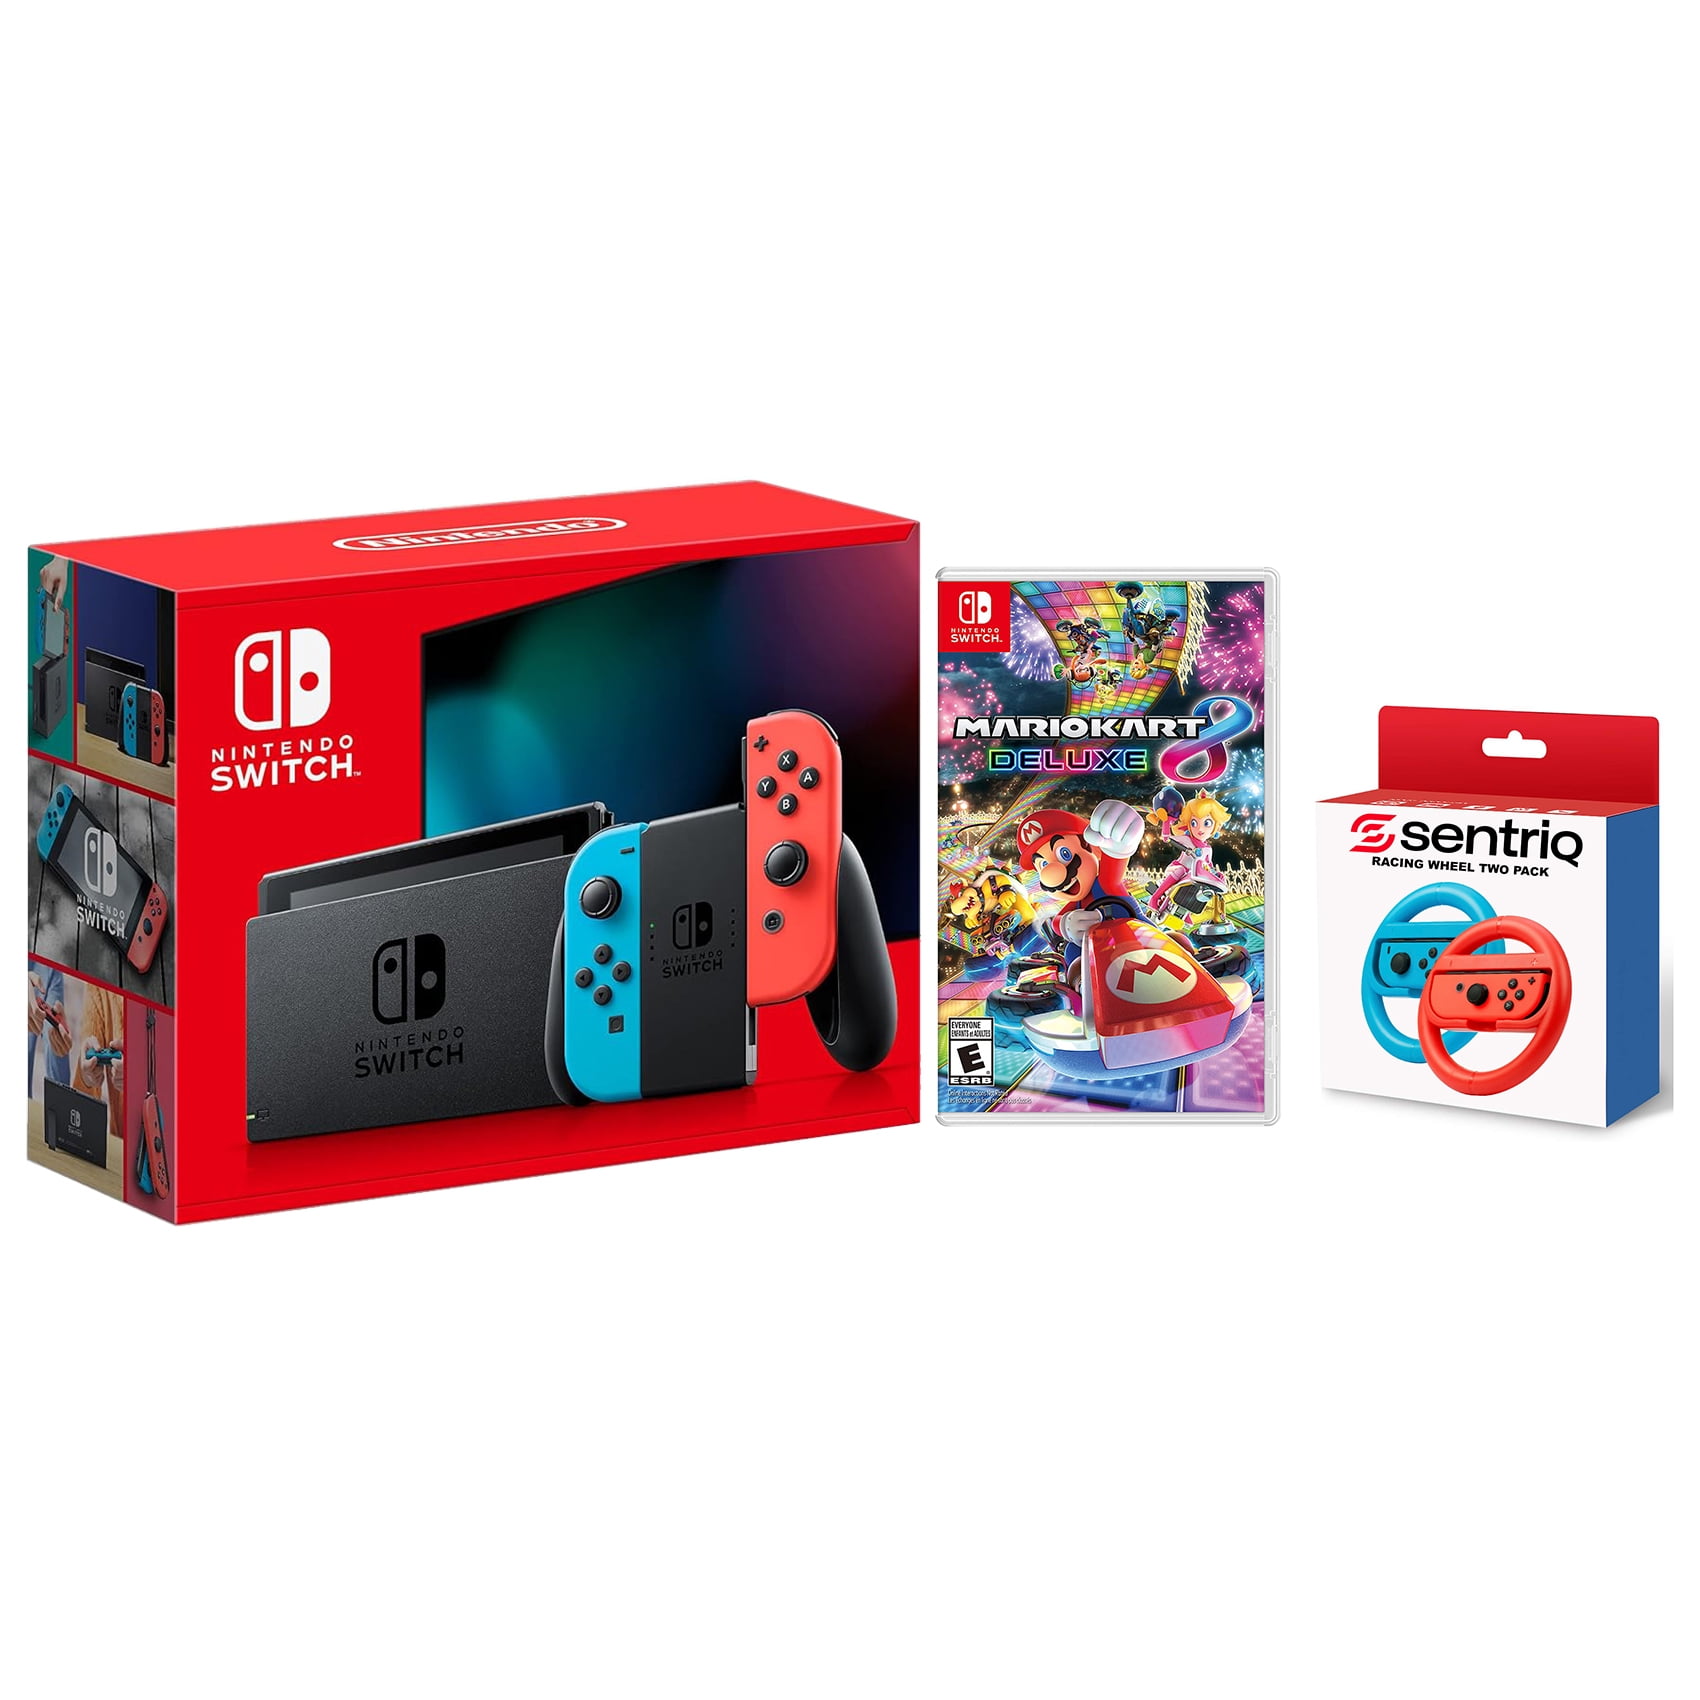 Nintendo Switch with Gray Joy‑Cons + Mario Kart 8 Deluxe + Sentriq Racing  Wheel Two Pack Joy Con Attachments - Japan Import with US Plug